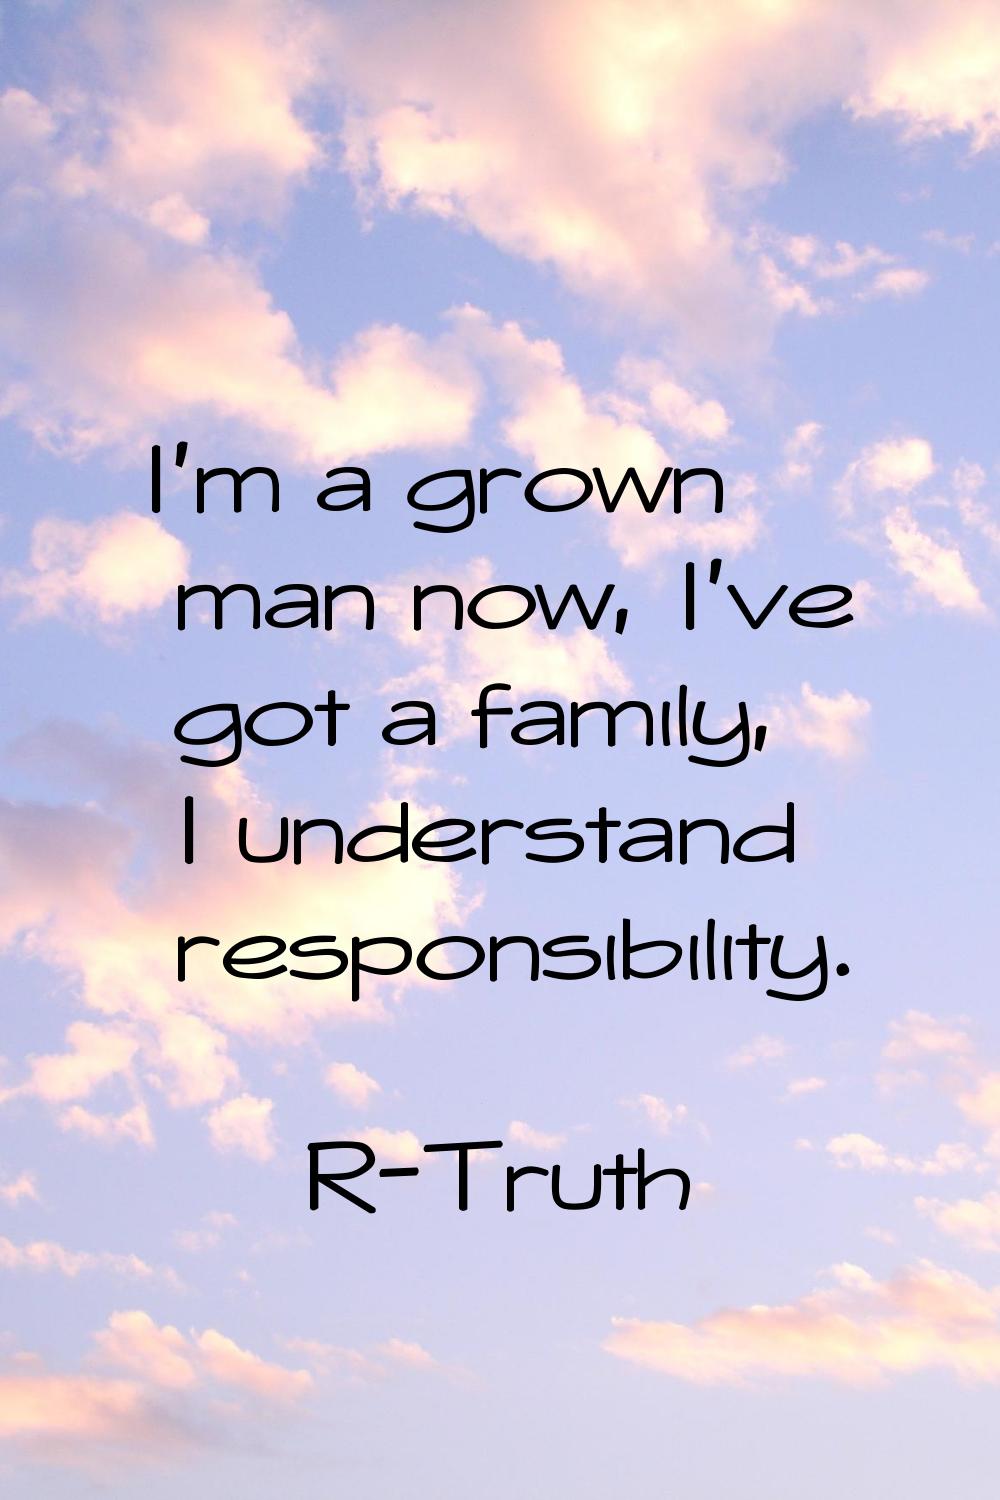 I'm a grown man now, I've got a family, I understand responsibility.